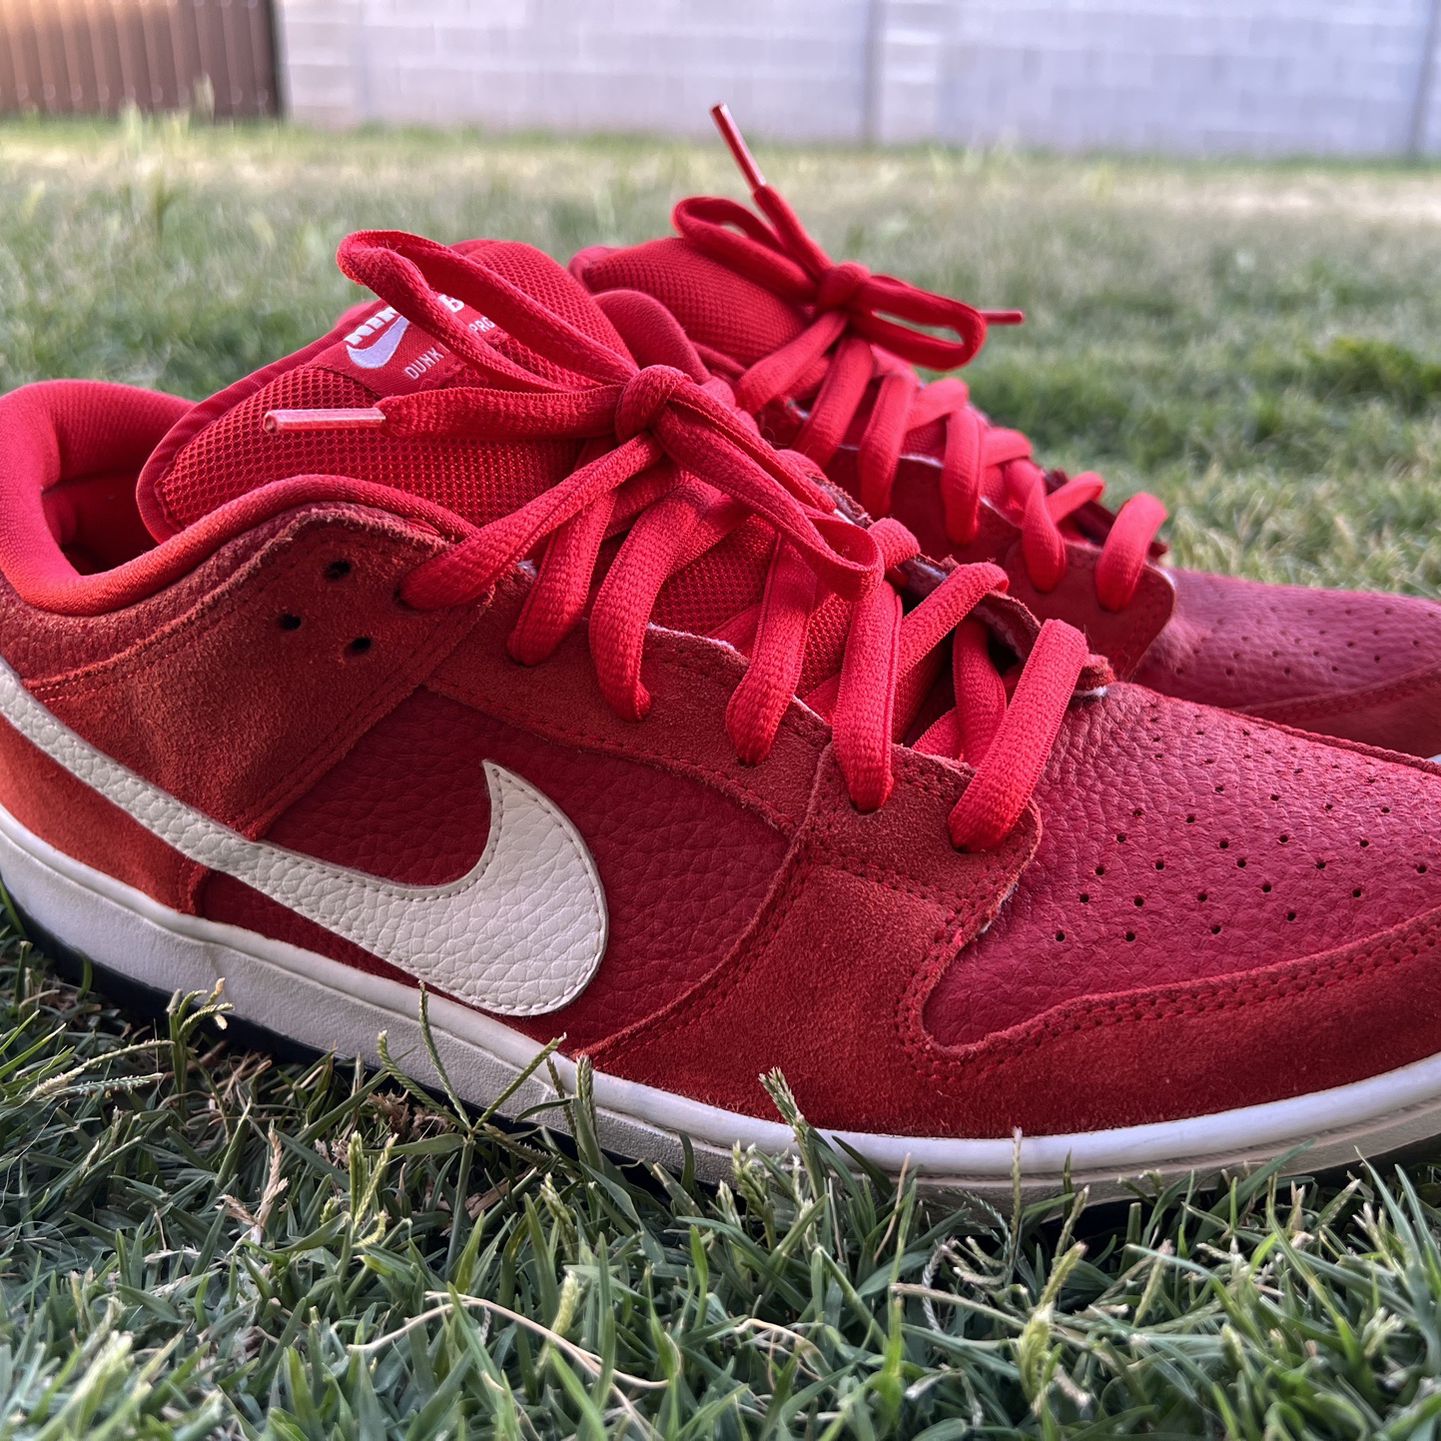 Nike SB Dunk Low “Challenge Red” sz 12 for Sale in Glendale, AZ 